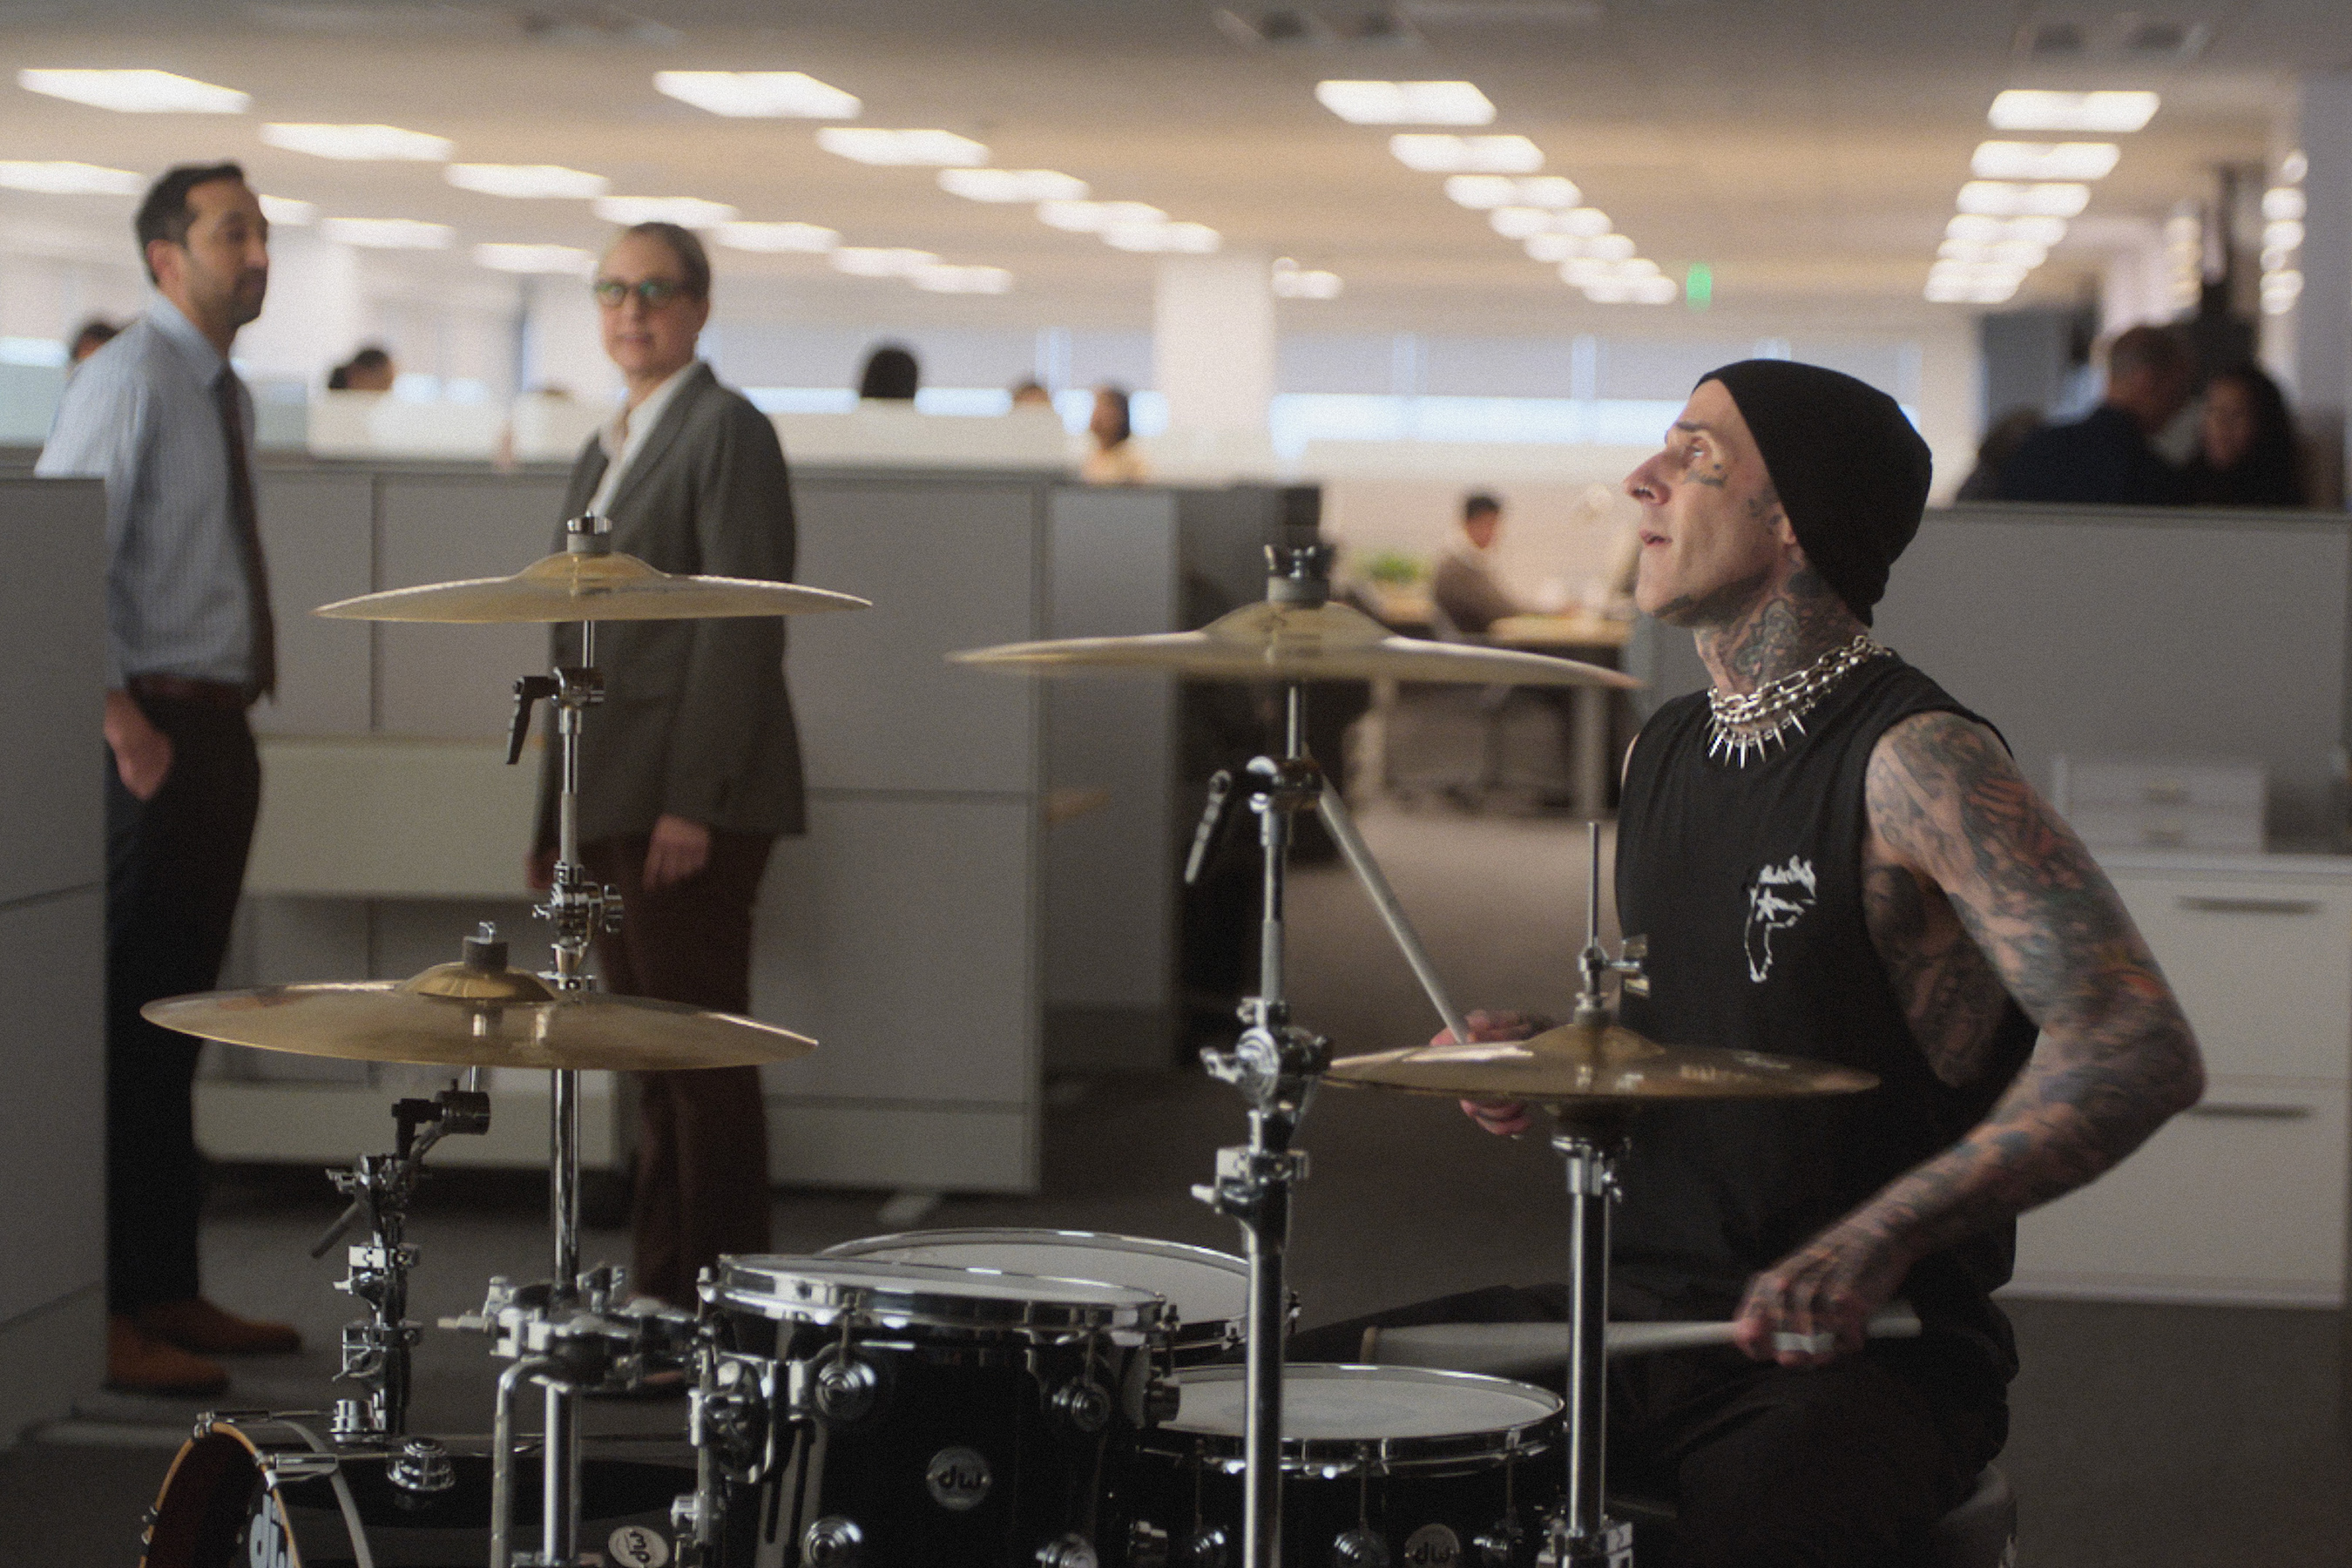 Workday Turns Up the Heat in the Next Wave of its Global Rock Star Campaign with Gwen Stefani, Travis Barker, and Billy Idol